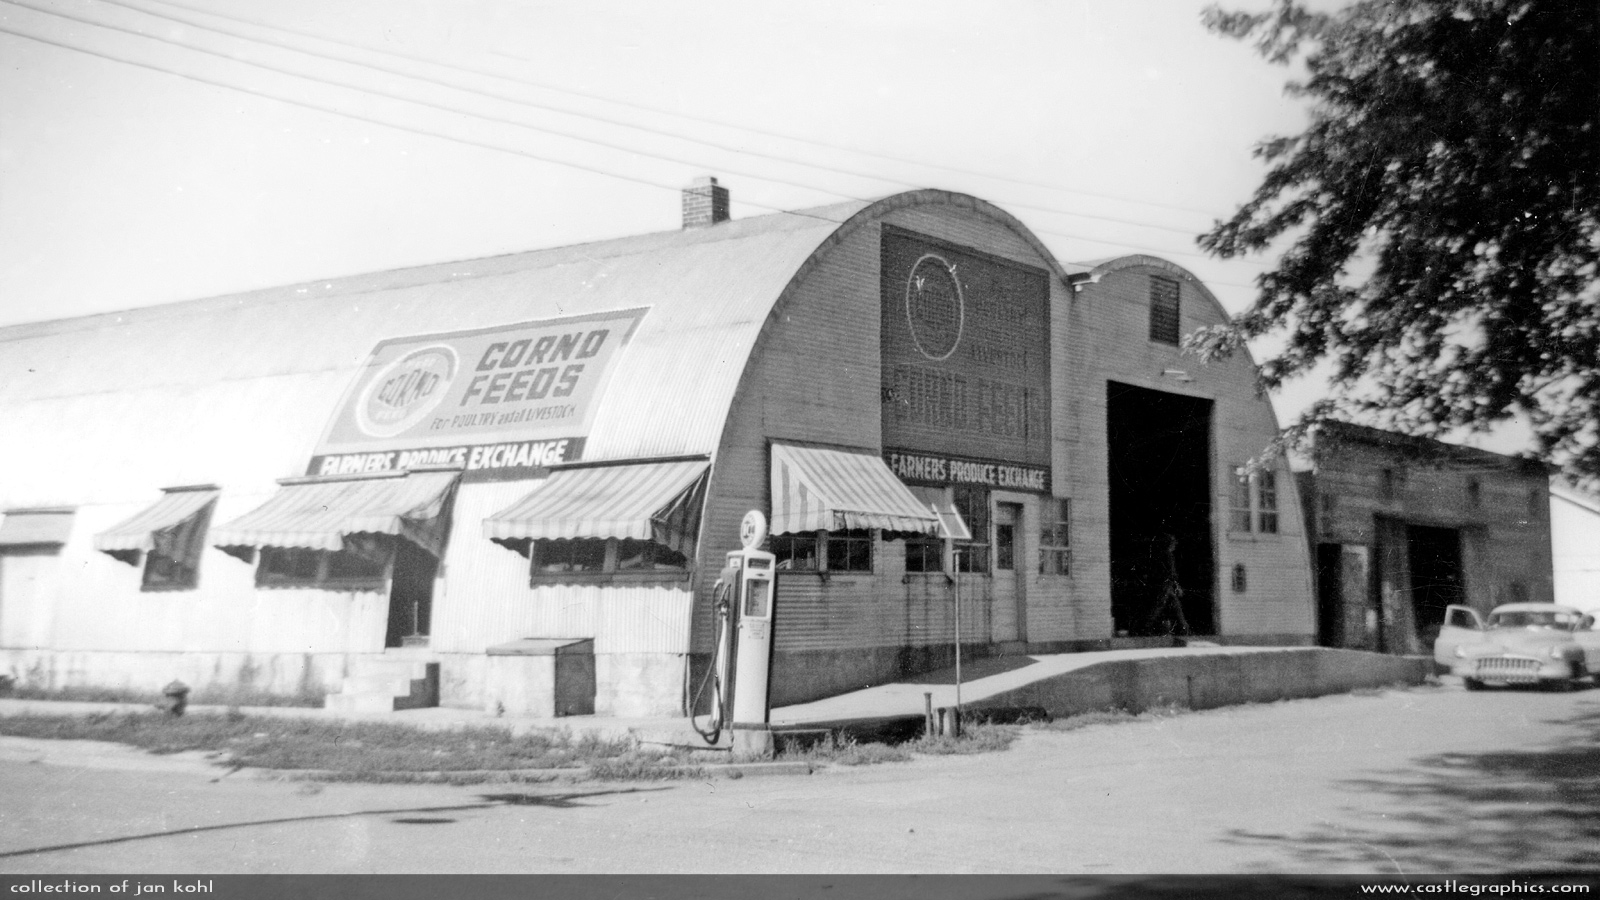 Farmers Produce Exchange in Elsberry
This double Quonset hut feed store was located in Elsberry in the 1950s on the corner of Griffin and 3rd.  It later became Philpott Motors, an auto repair place.  The building is still standing, but abandoned and in bad shape.
